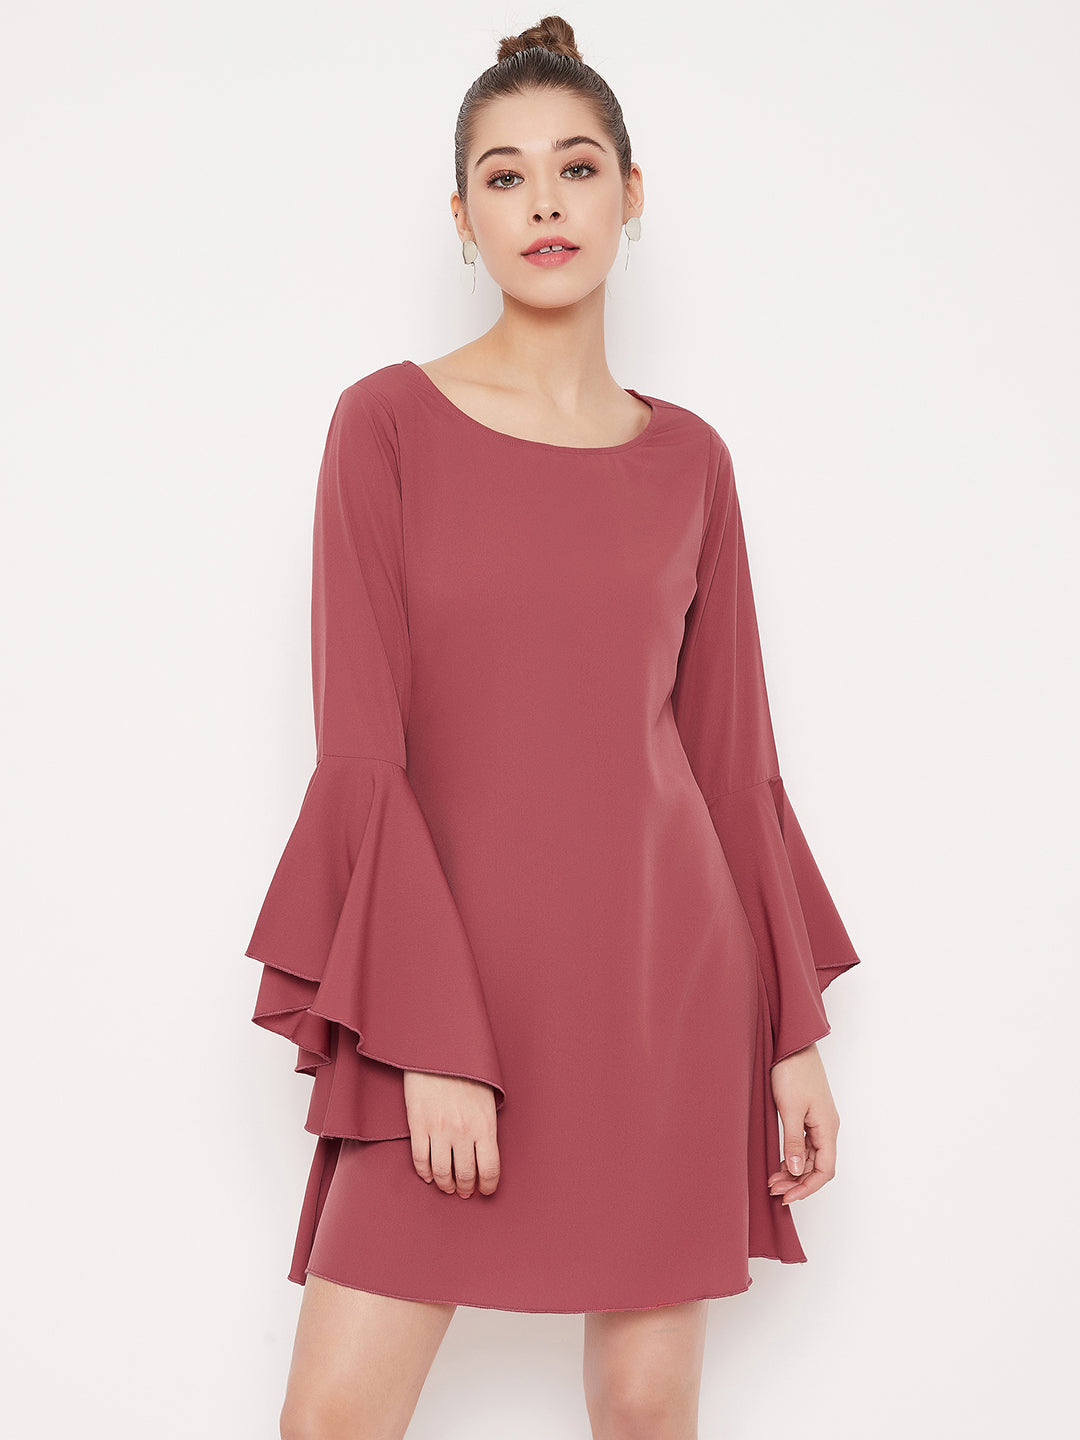 Berrylush Pink Solid Flared Sleeves Dress